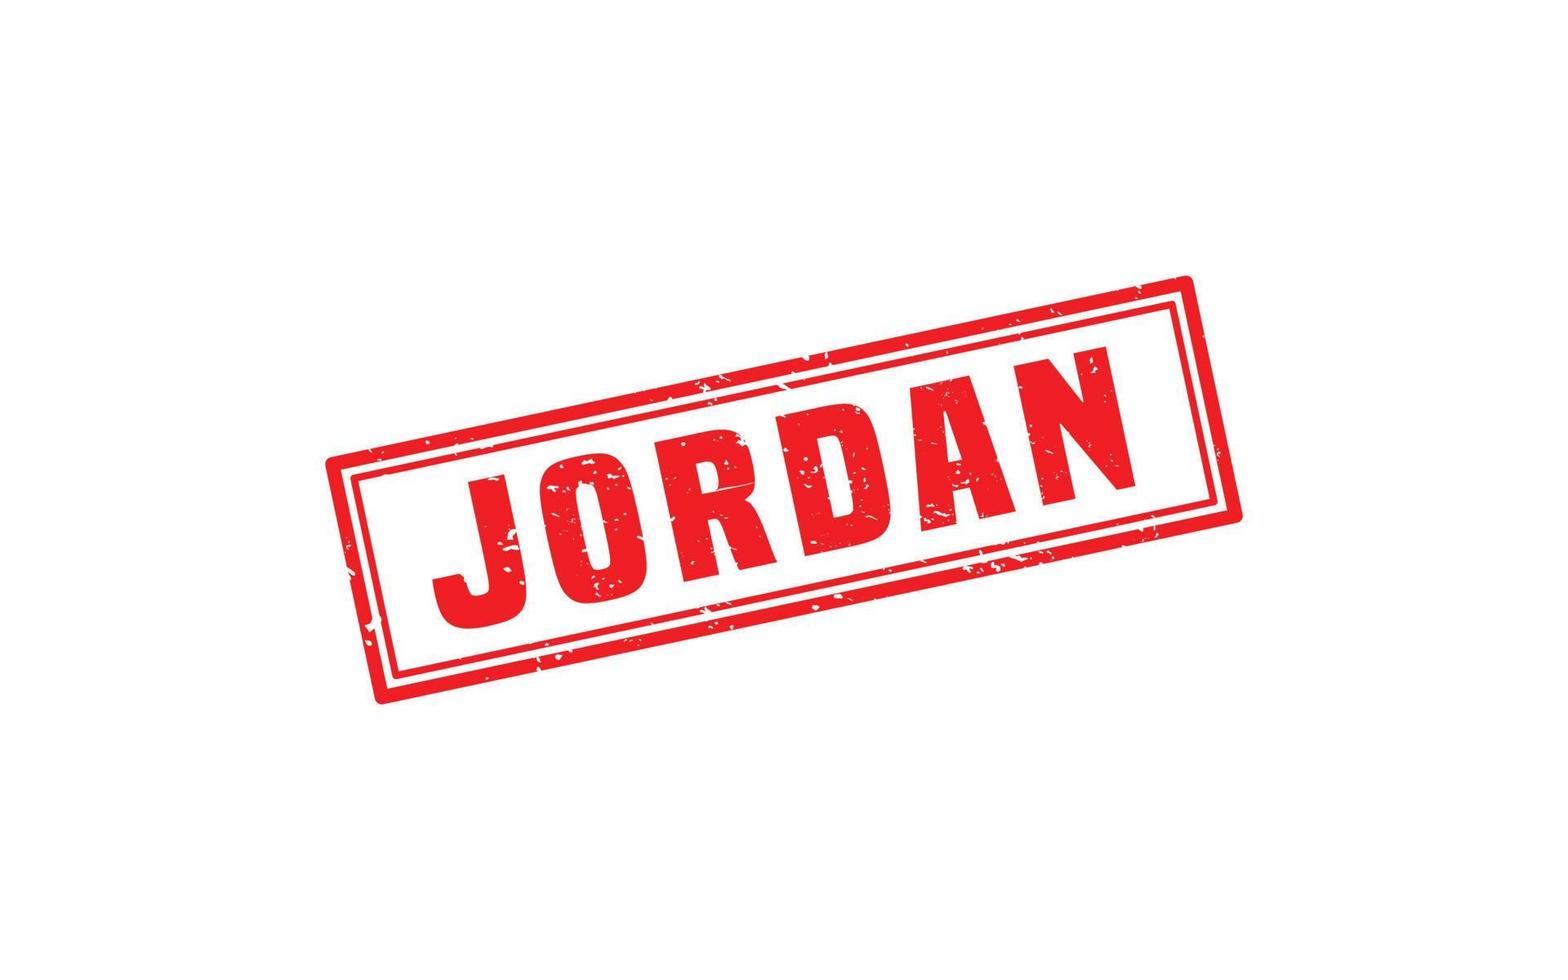 JORDAN stamp rubber with grunge style on white background vector